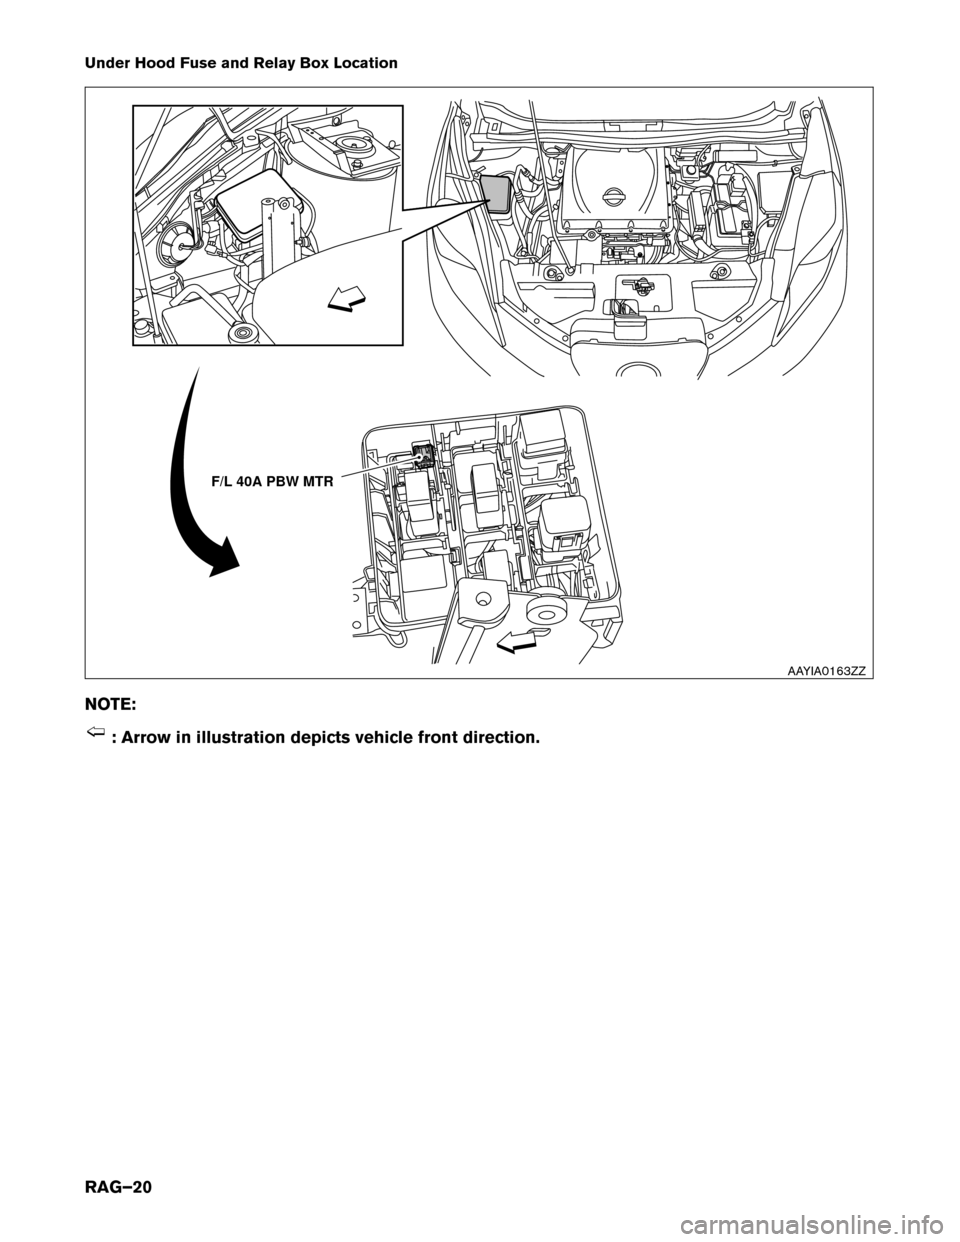 NISSAN LEAF 2014 1.G Roadside Assistance Guide Under Hood Fuse and Relay Box Location
NO
TE: : Arrow in illustration depicts vehicle front direction. F/L 40A PBW MTR
AAYIA0163ZZ
RAG–20 